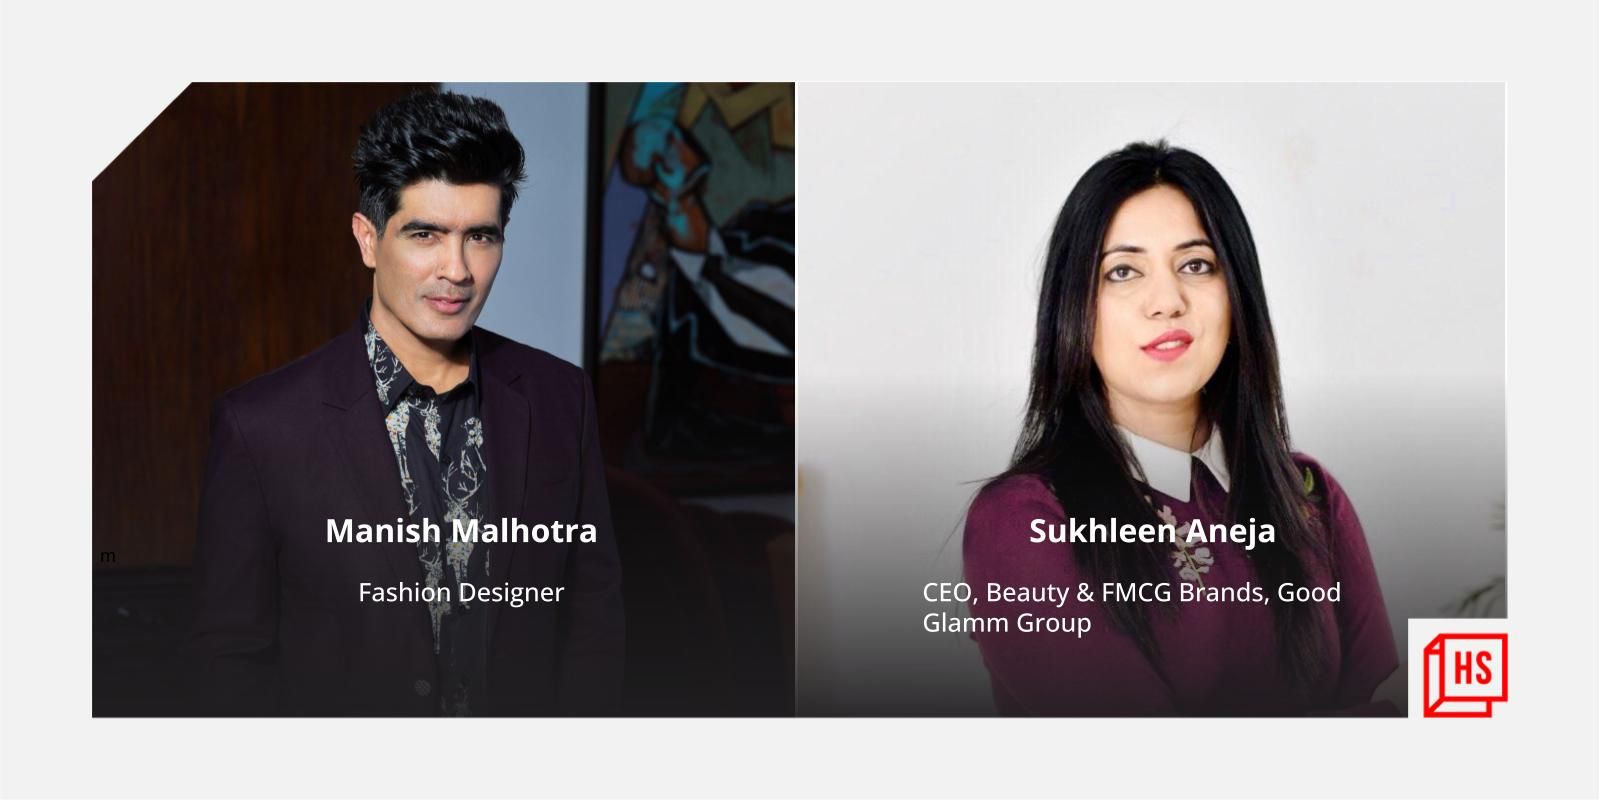 The consumer lies at the centre of all our decisions: Manish Malhotra and Sukhleen Aneja on luxury make-up brand 